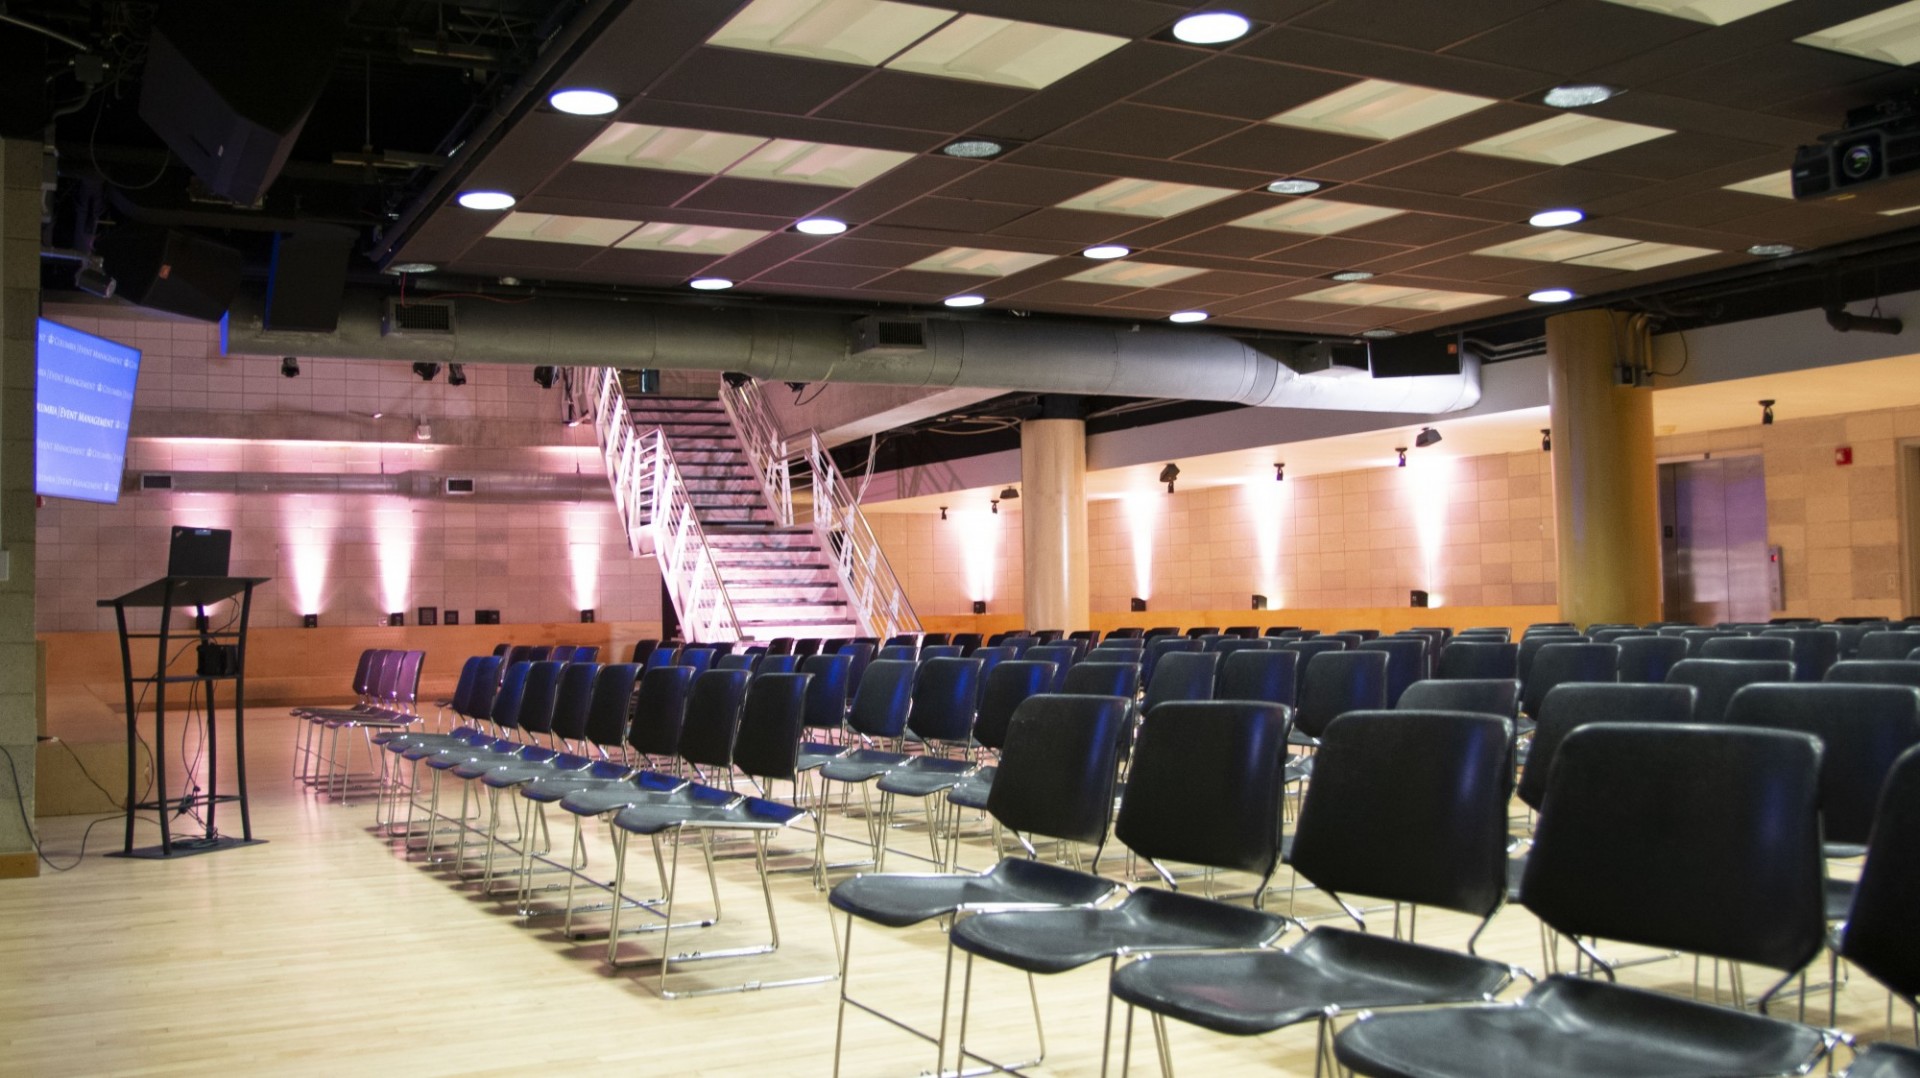 Rows of black chairs face a podium. In the background, a staircase can be seen.